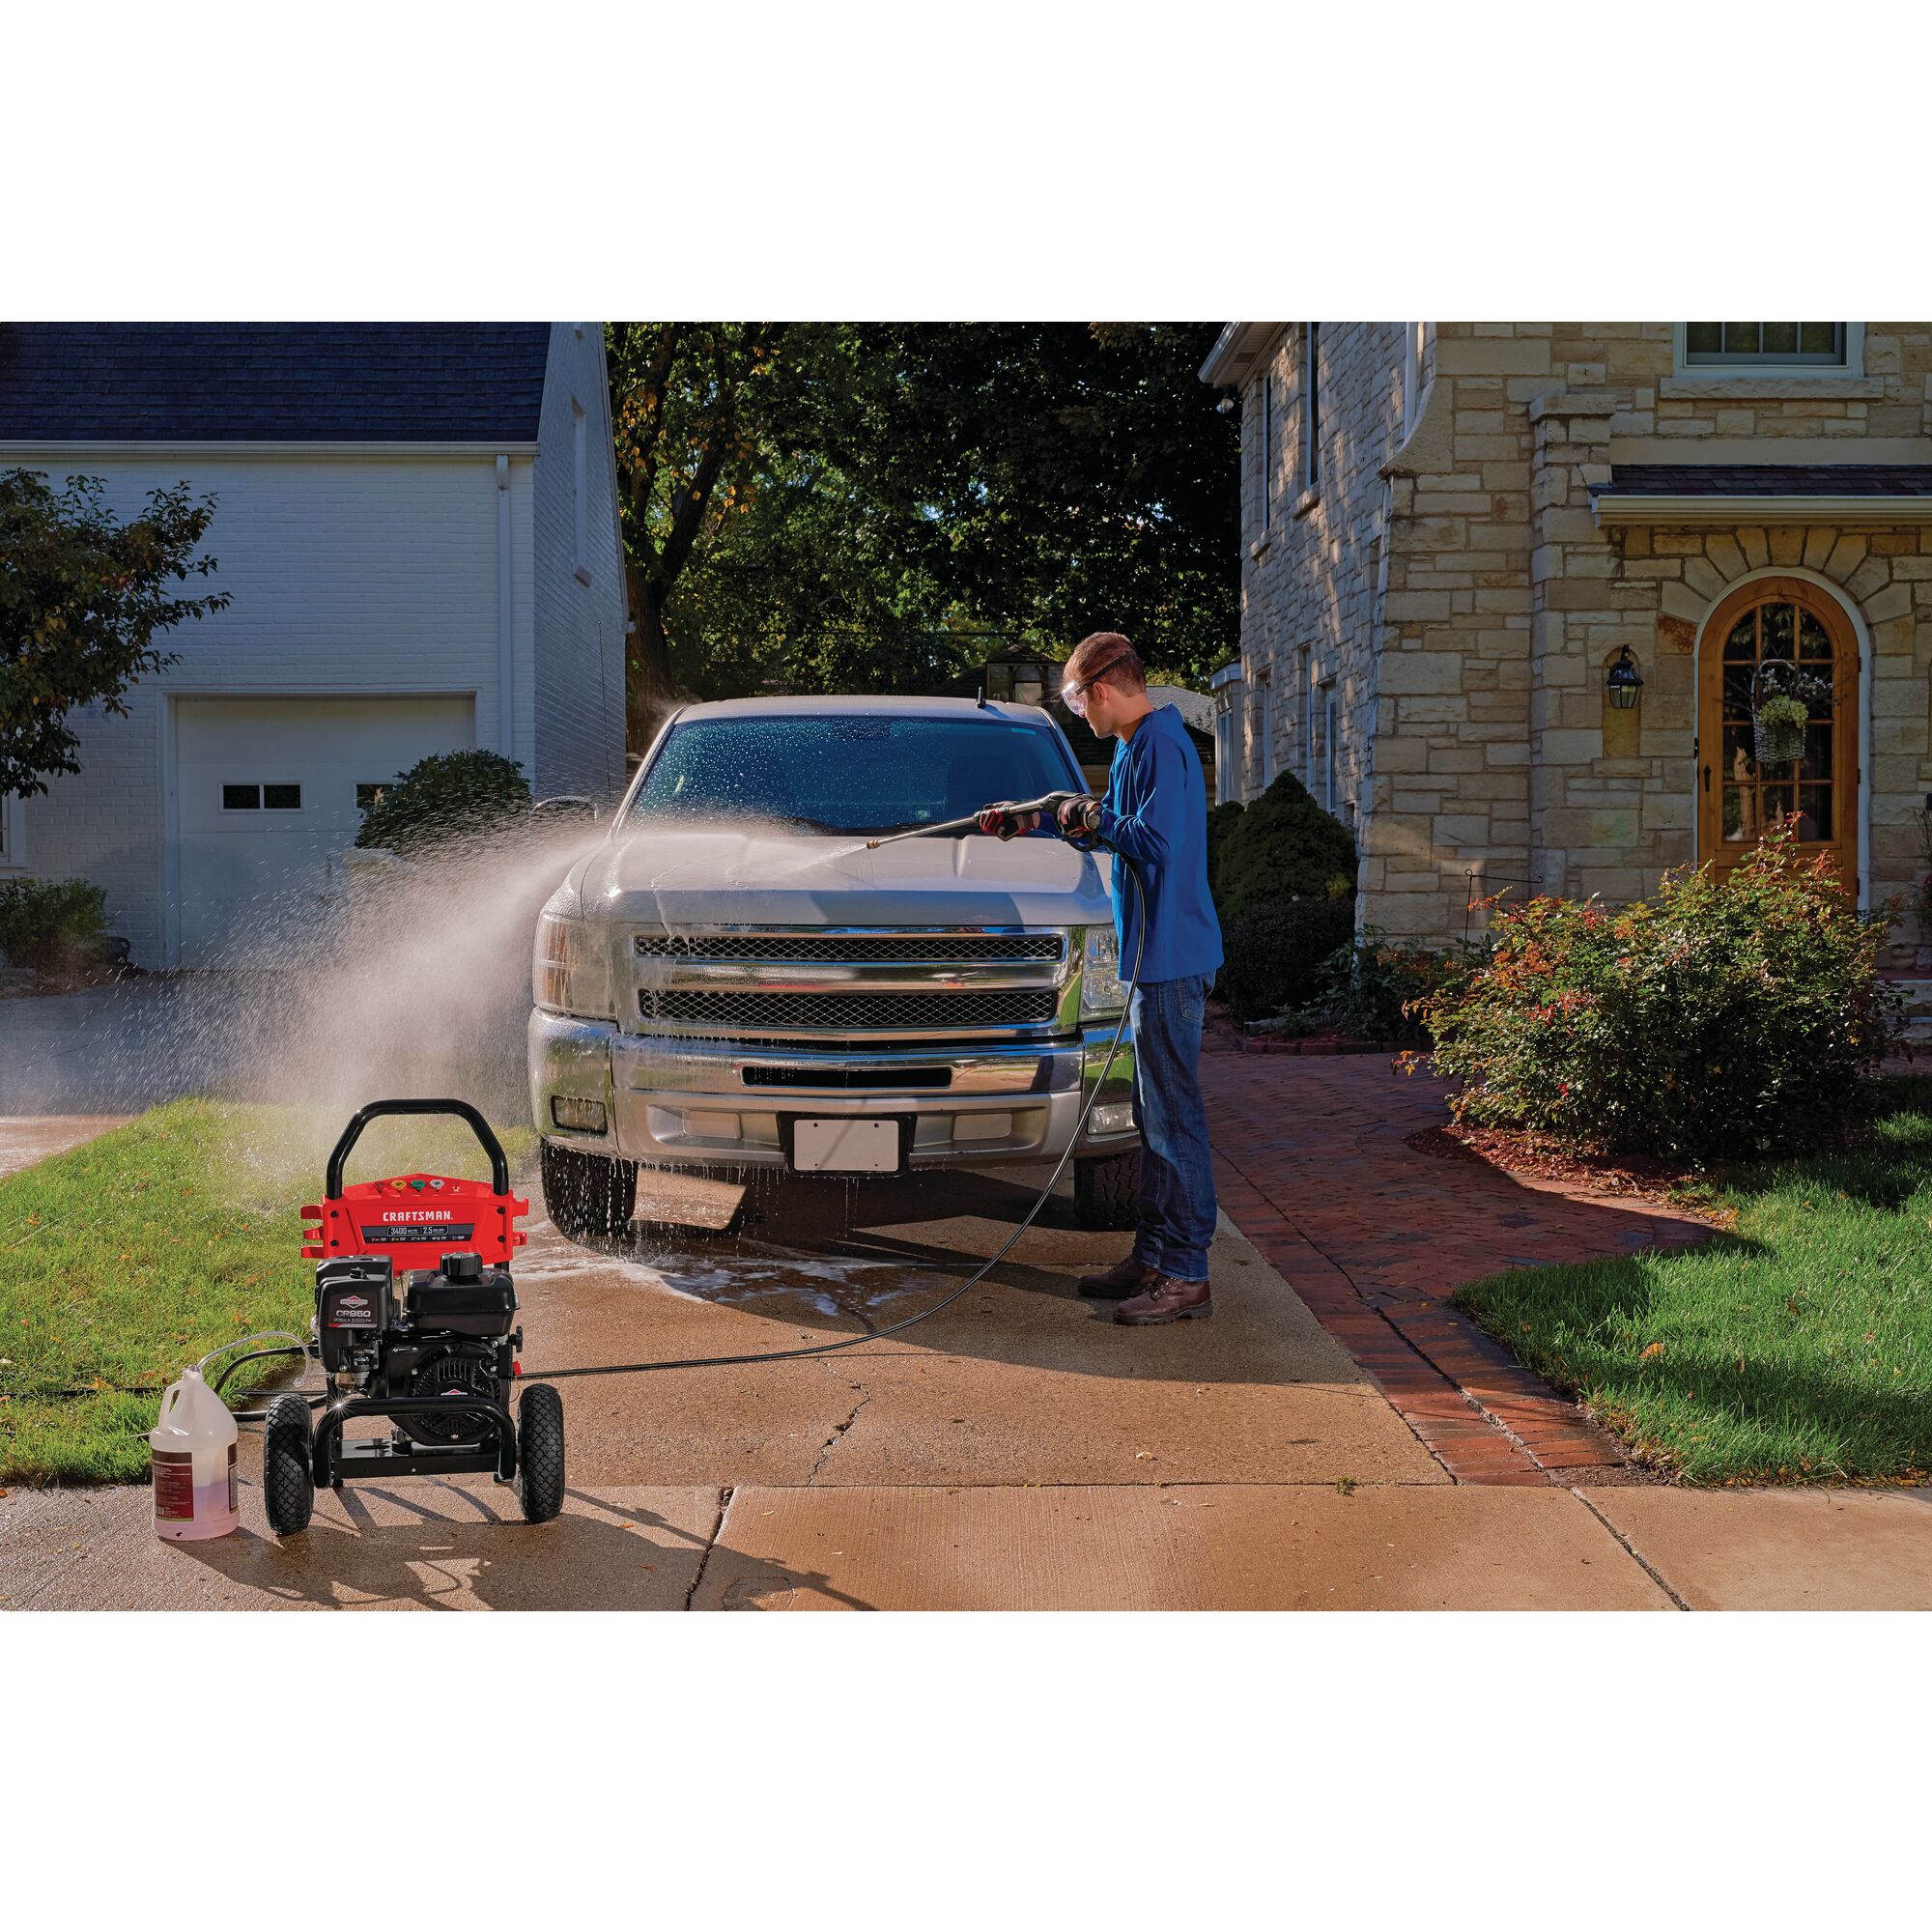 3400 MAX Pounds per Square Inch or 2 and five tenths MAX Gallons Per Minute Pressure Washer being used by person to wash car bonnet outdoors.